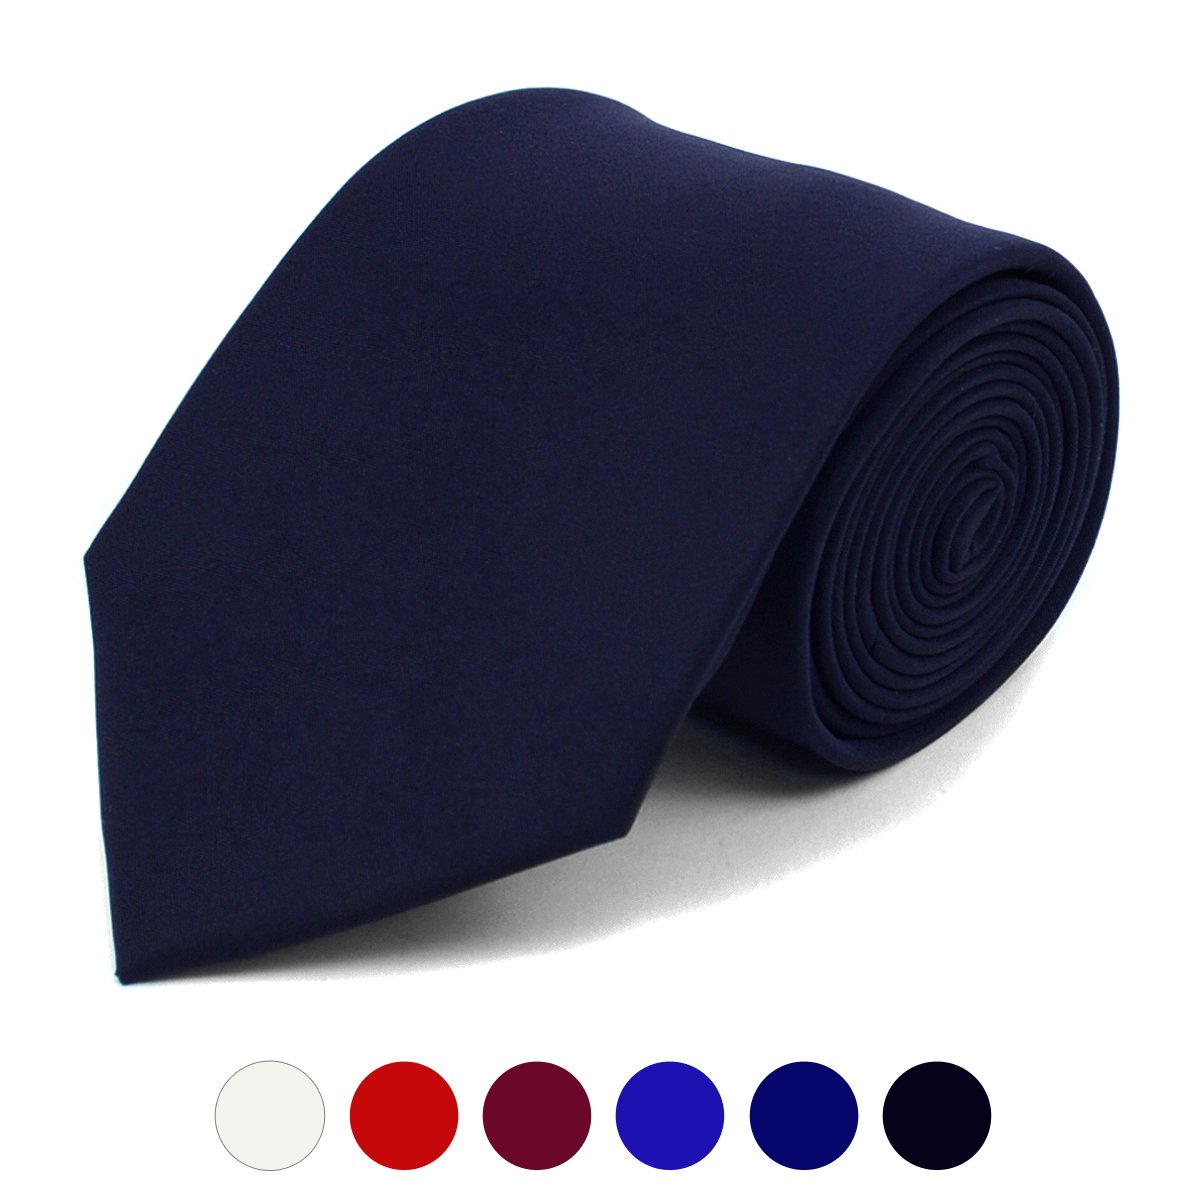 Non-shiny Poly Solid CVC Tie PSF1701 - Caterwear.com